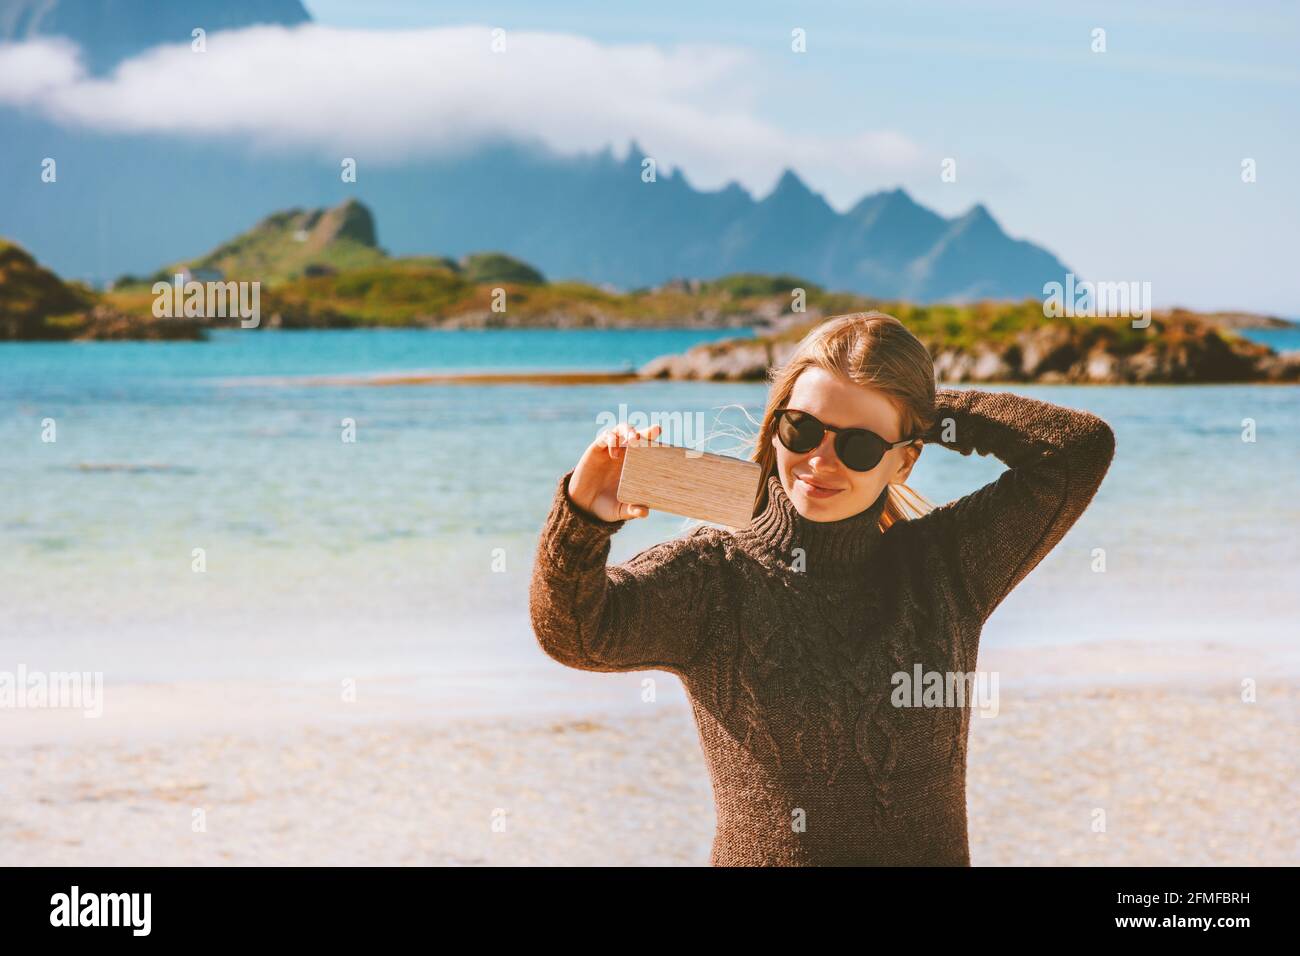 Woman blogging taking photo by smartphone camera capturing moments girl traveling alone influencer outdoor summer vacations trip Stock Photo